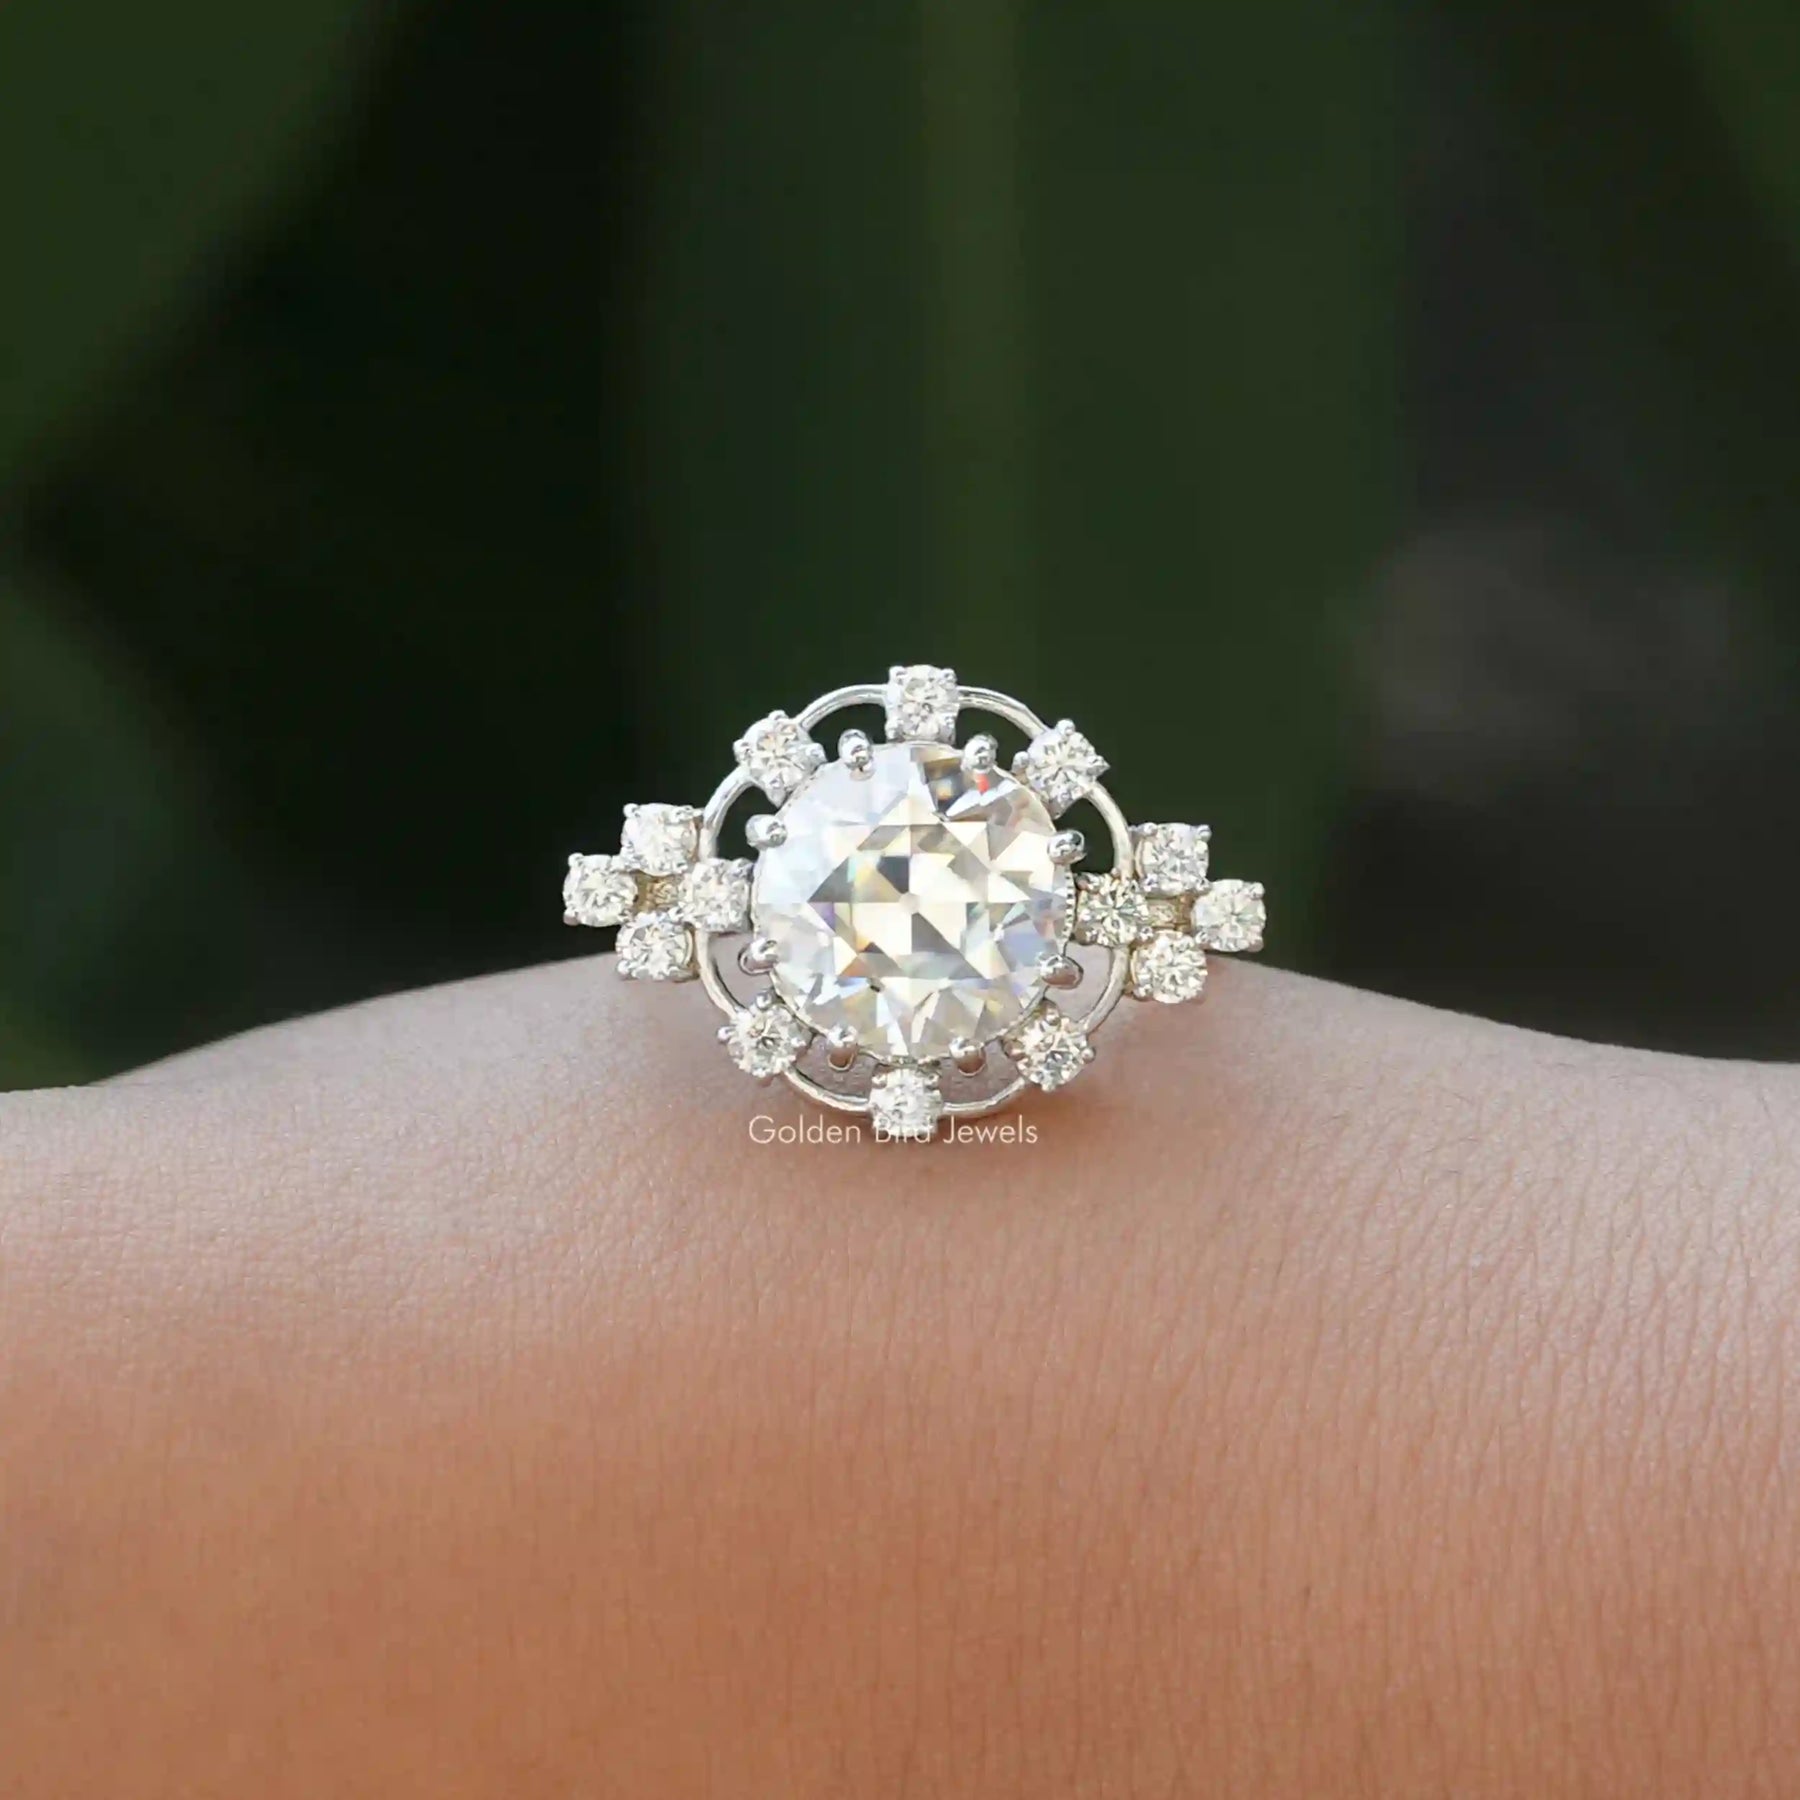 [Moissanite old european round cut proposal ring set in side round cut stones]